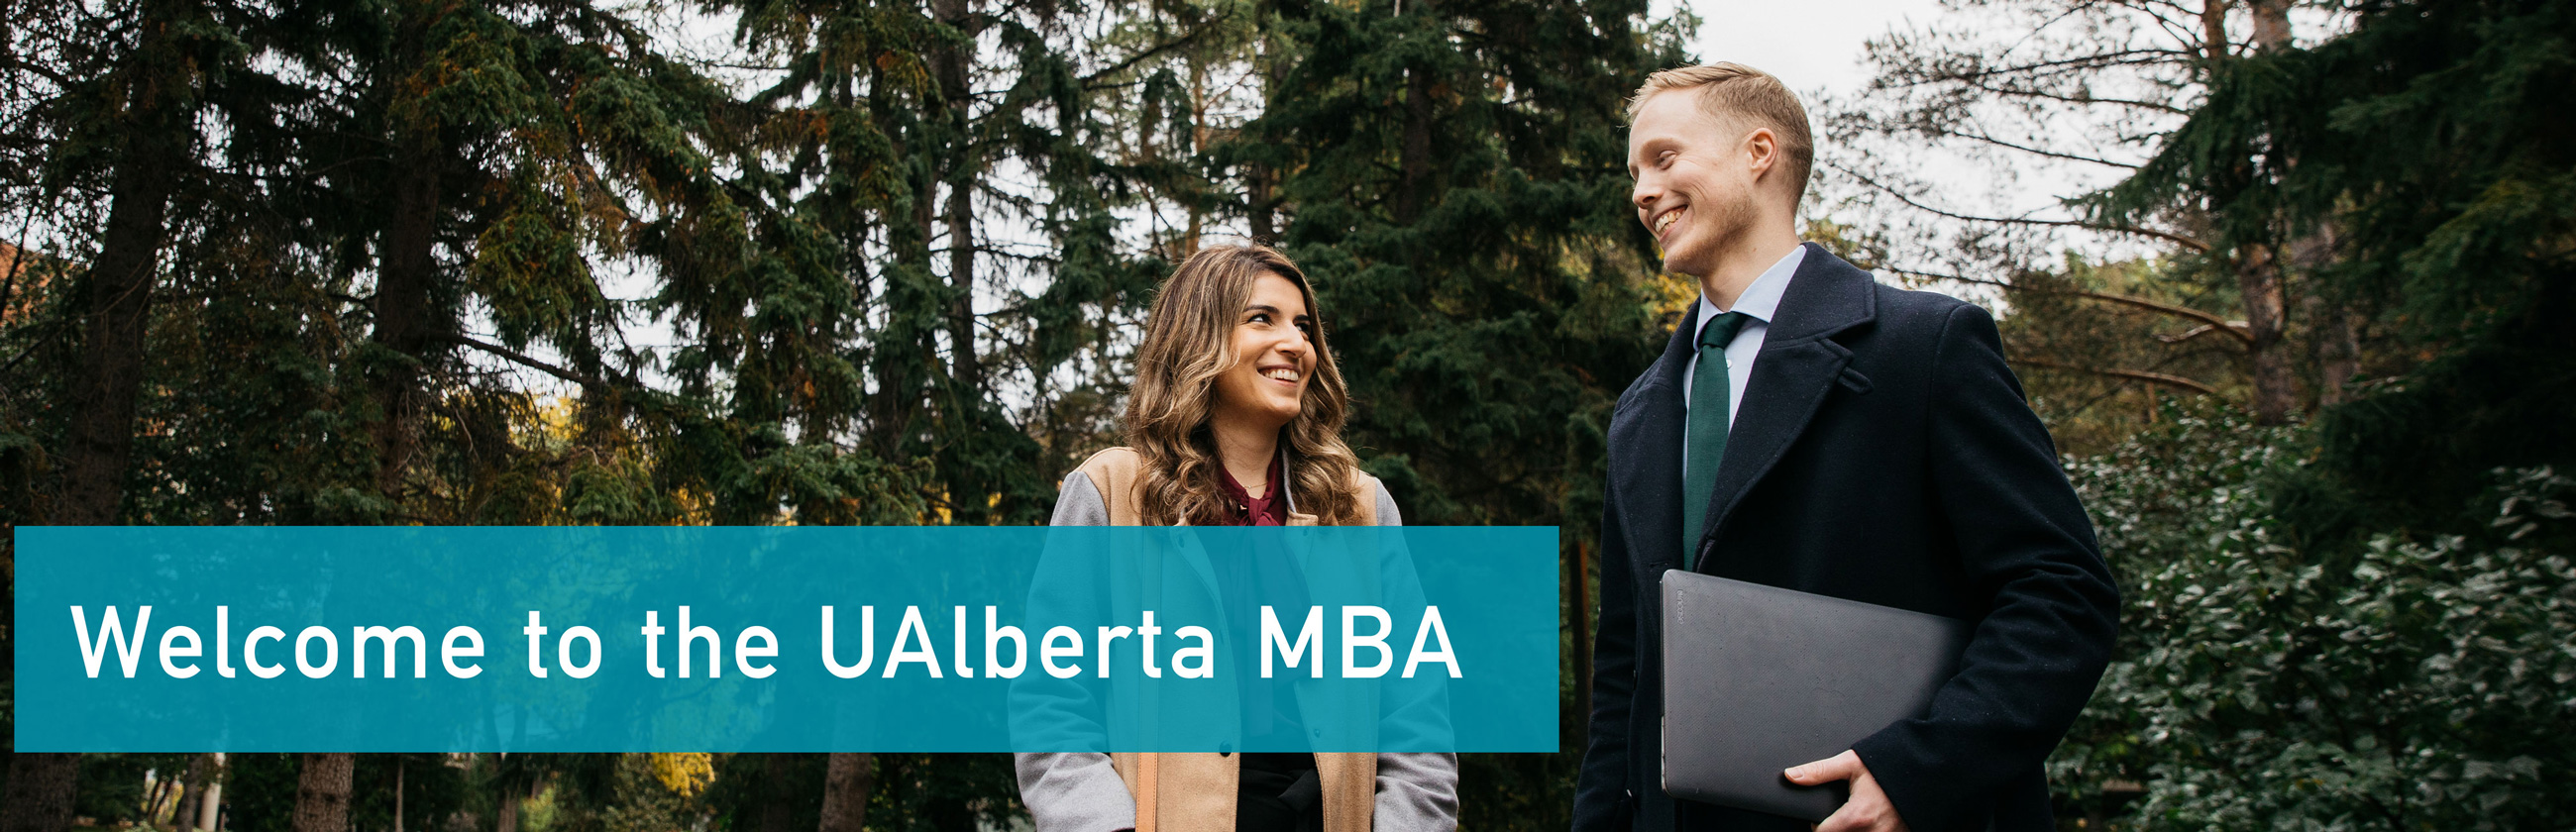 Welcome to the UAlberta MBA